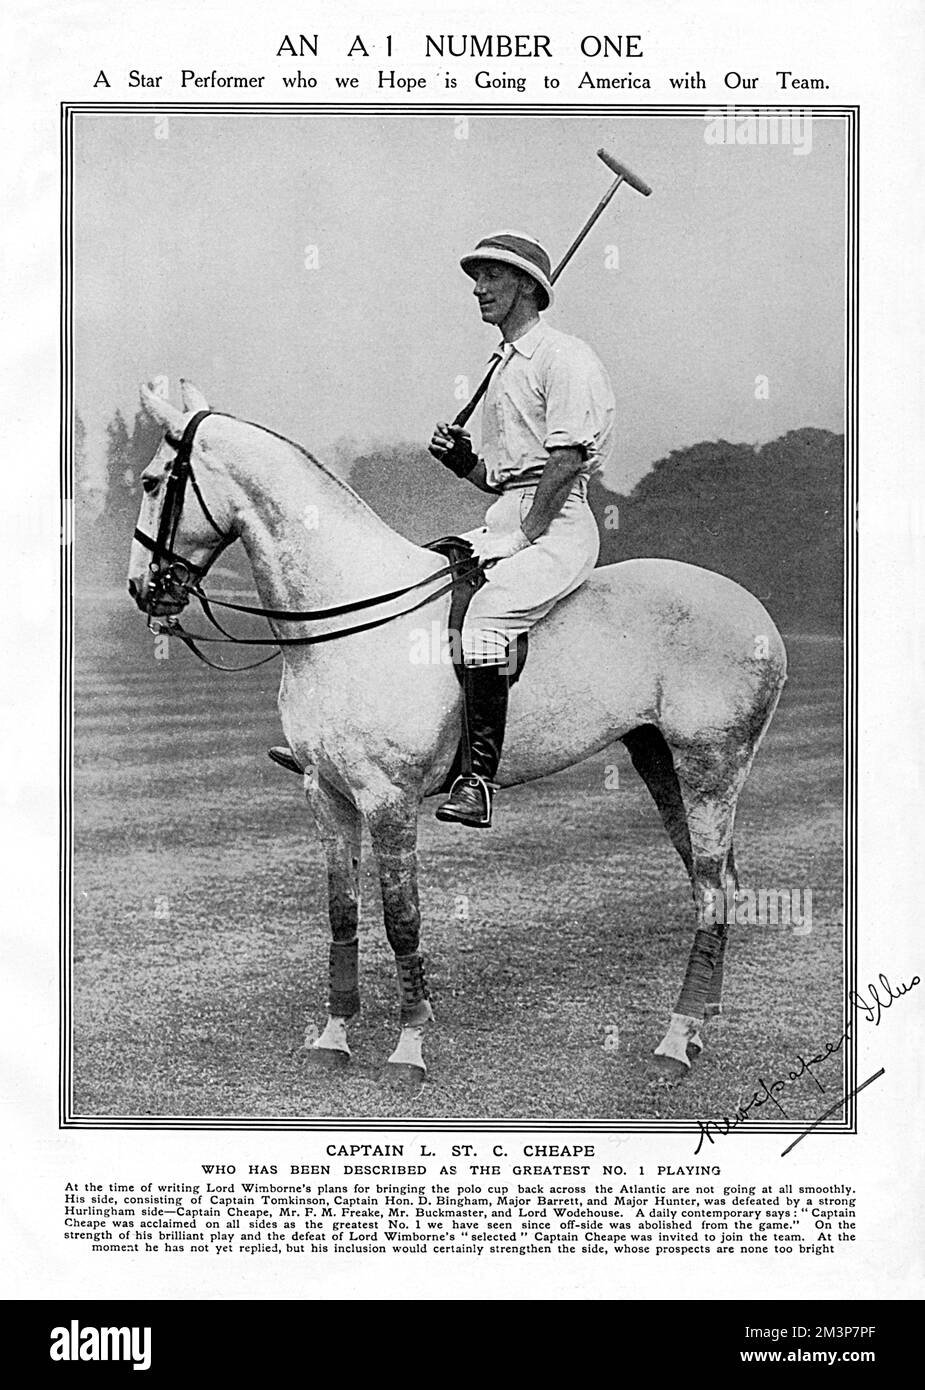 Captain Leslie St. Clair Cheape (1882-1916), British soldier and polo player dubbed, 'England's greatest polo player'. He played for England in the Westchester Cup three times in 1911, 1913 and 1914. He was killed on 23 April 1916 while commanding a squadron of the Worcestershire Yeomanry in Egypt.  Pictured in The Tatler in 1914, and described as 'a star performer who we hope is going to American with our team.' Cheape did go and was pivotal in helping England win their historic victory over their American rivals in the International Polo Trophy (Westchester Cup), despite being impeded by bro Stock Photo